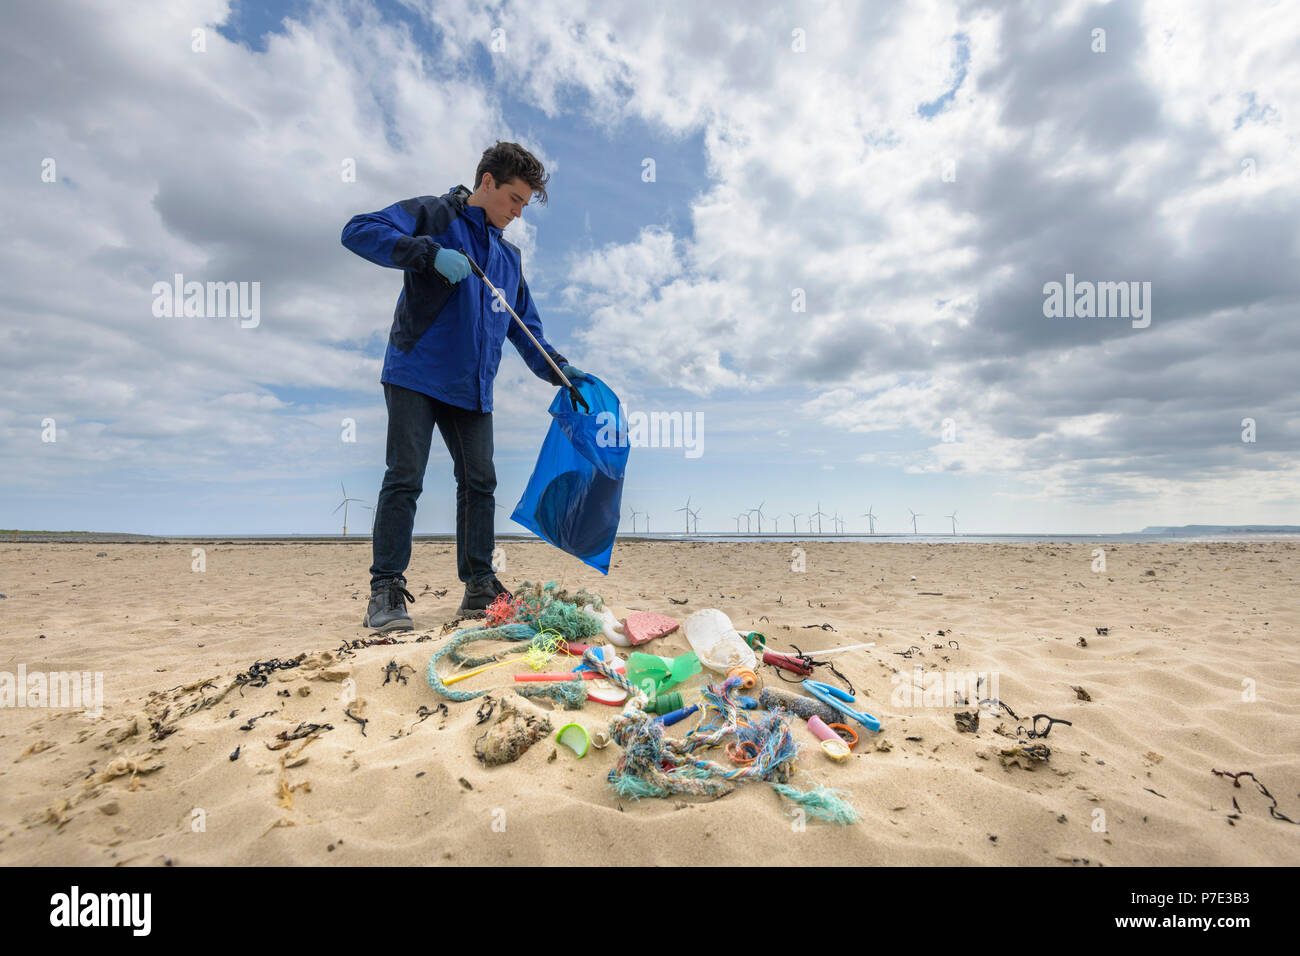 Man picking up plastic pollution collected on beach, North East England, UK Stock Photo